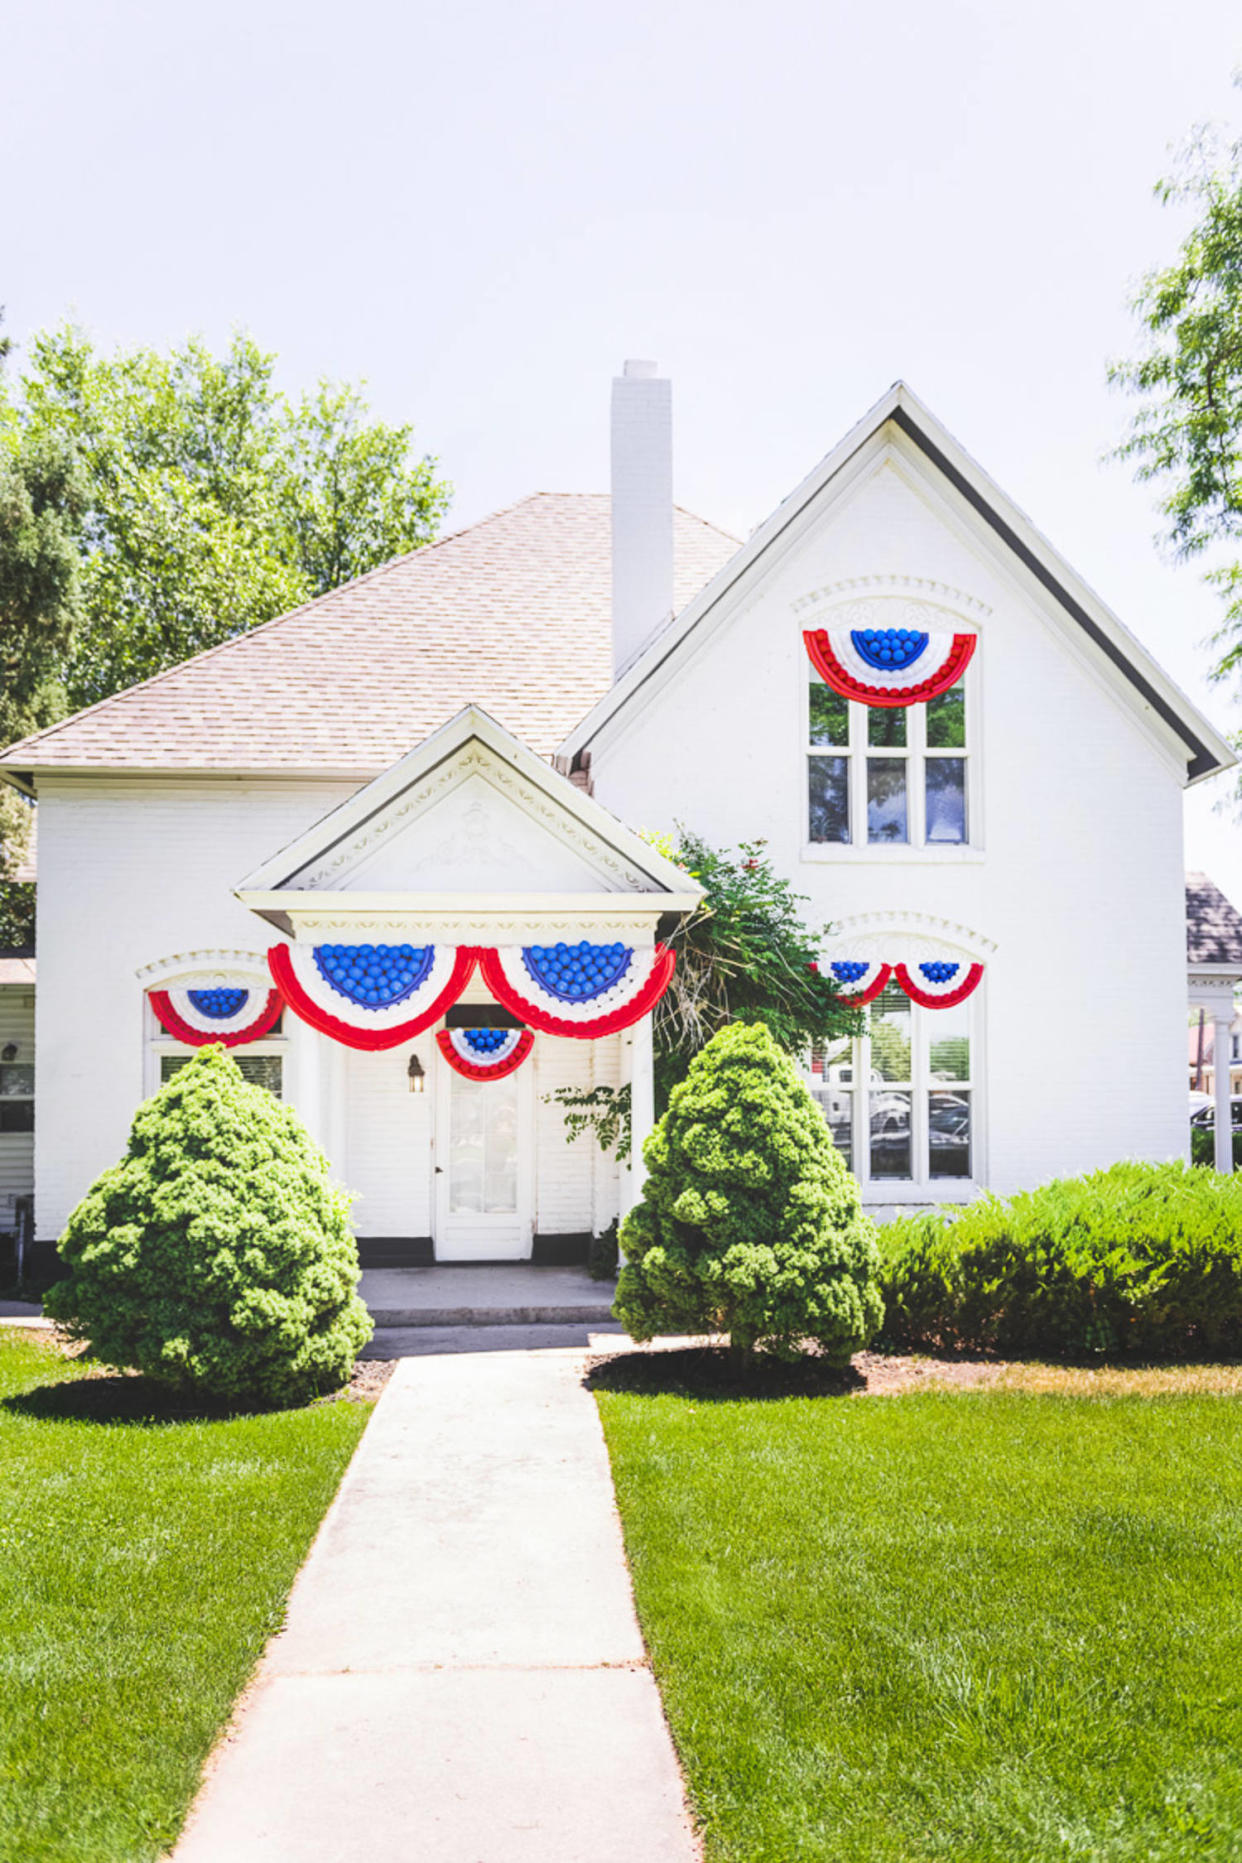 red, white and blue bunting on house (Jane Merritt of The House That Lars Built)